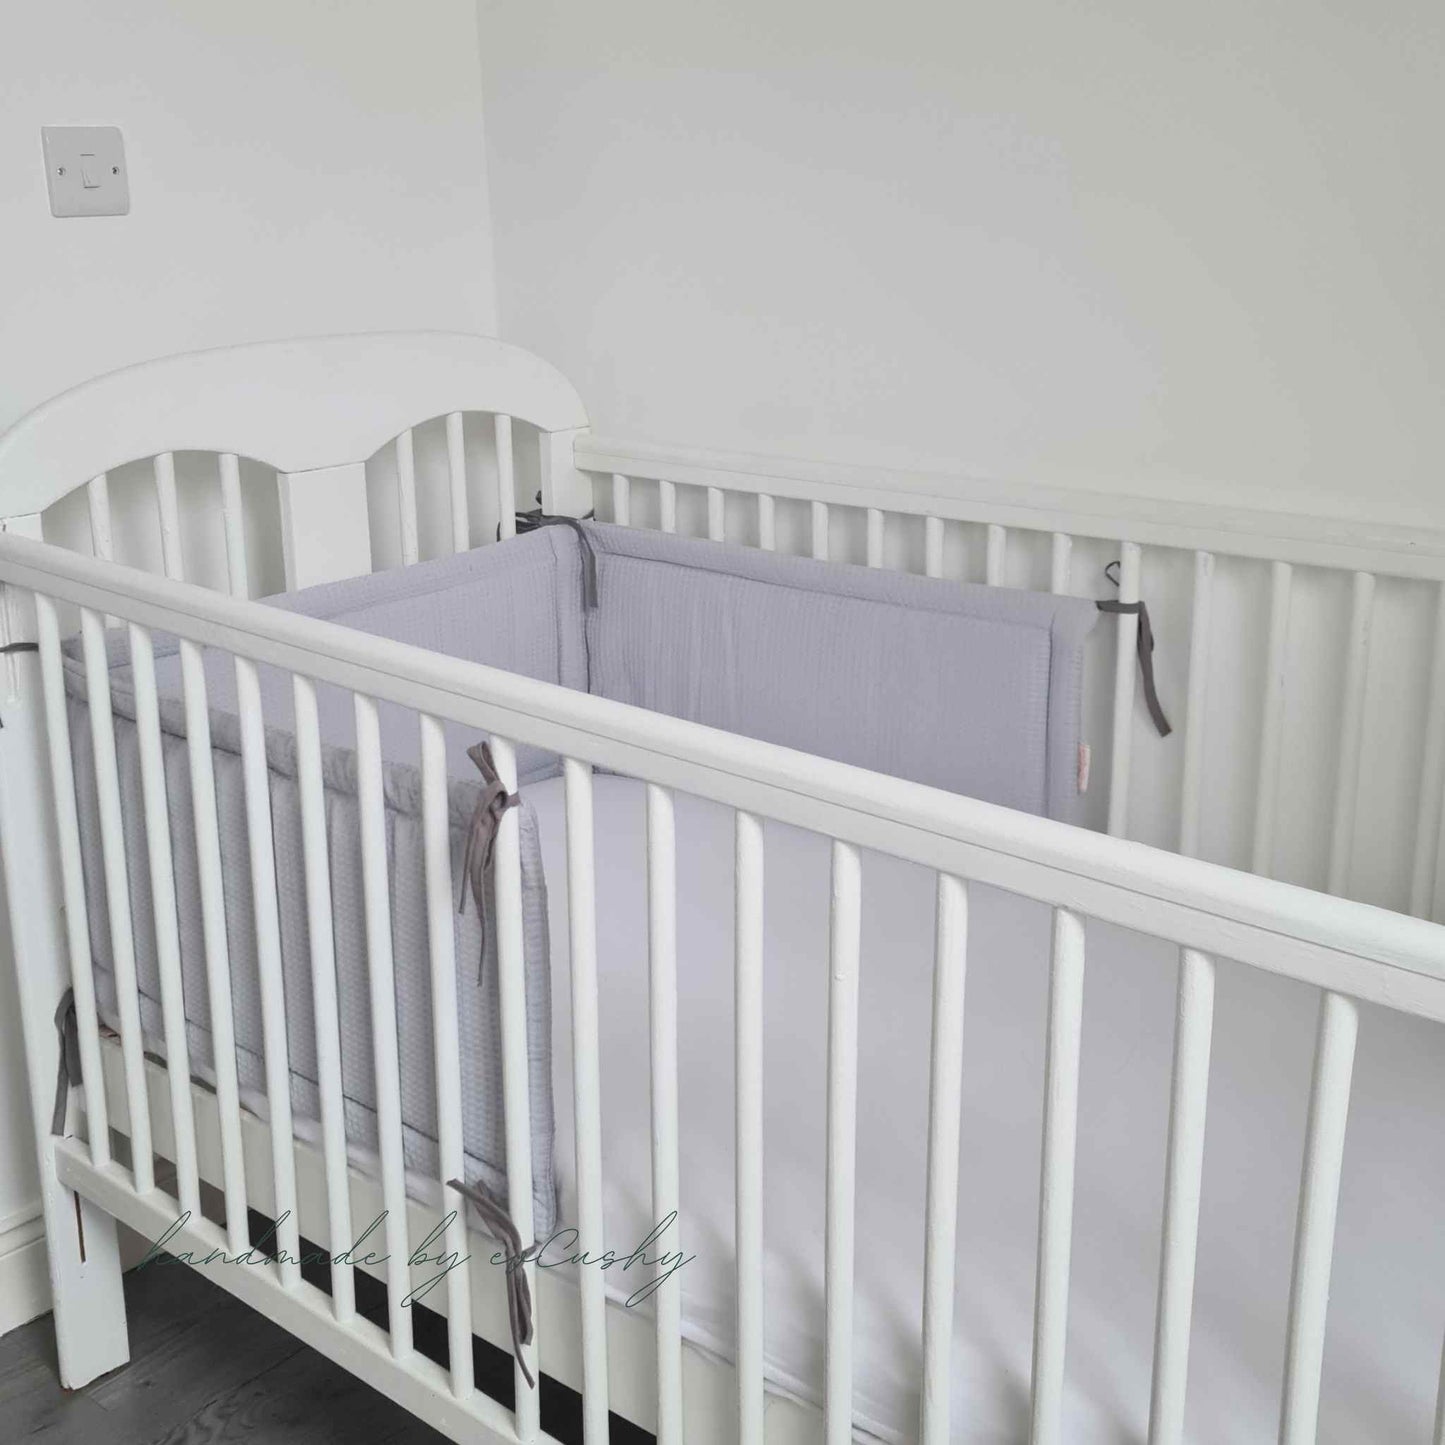 cot bumper grey 100% cotton for cot bed evcushy